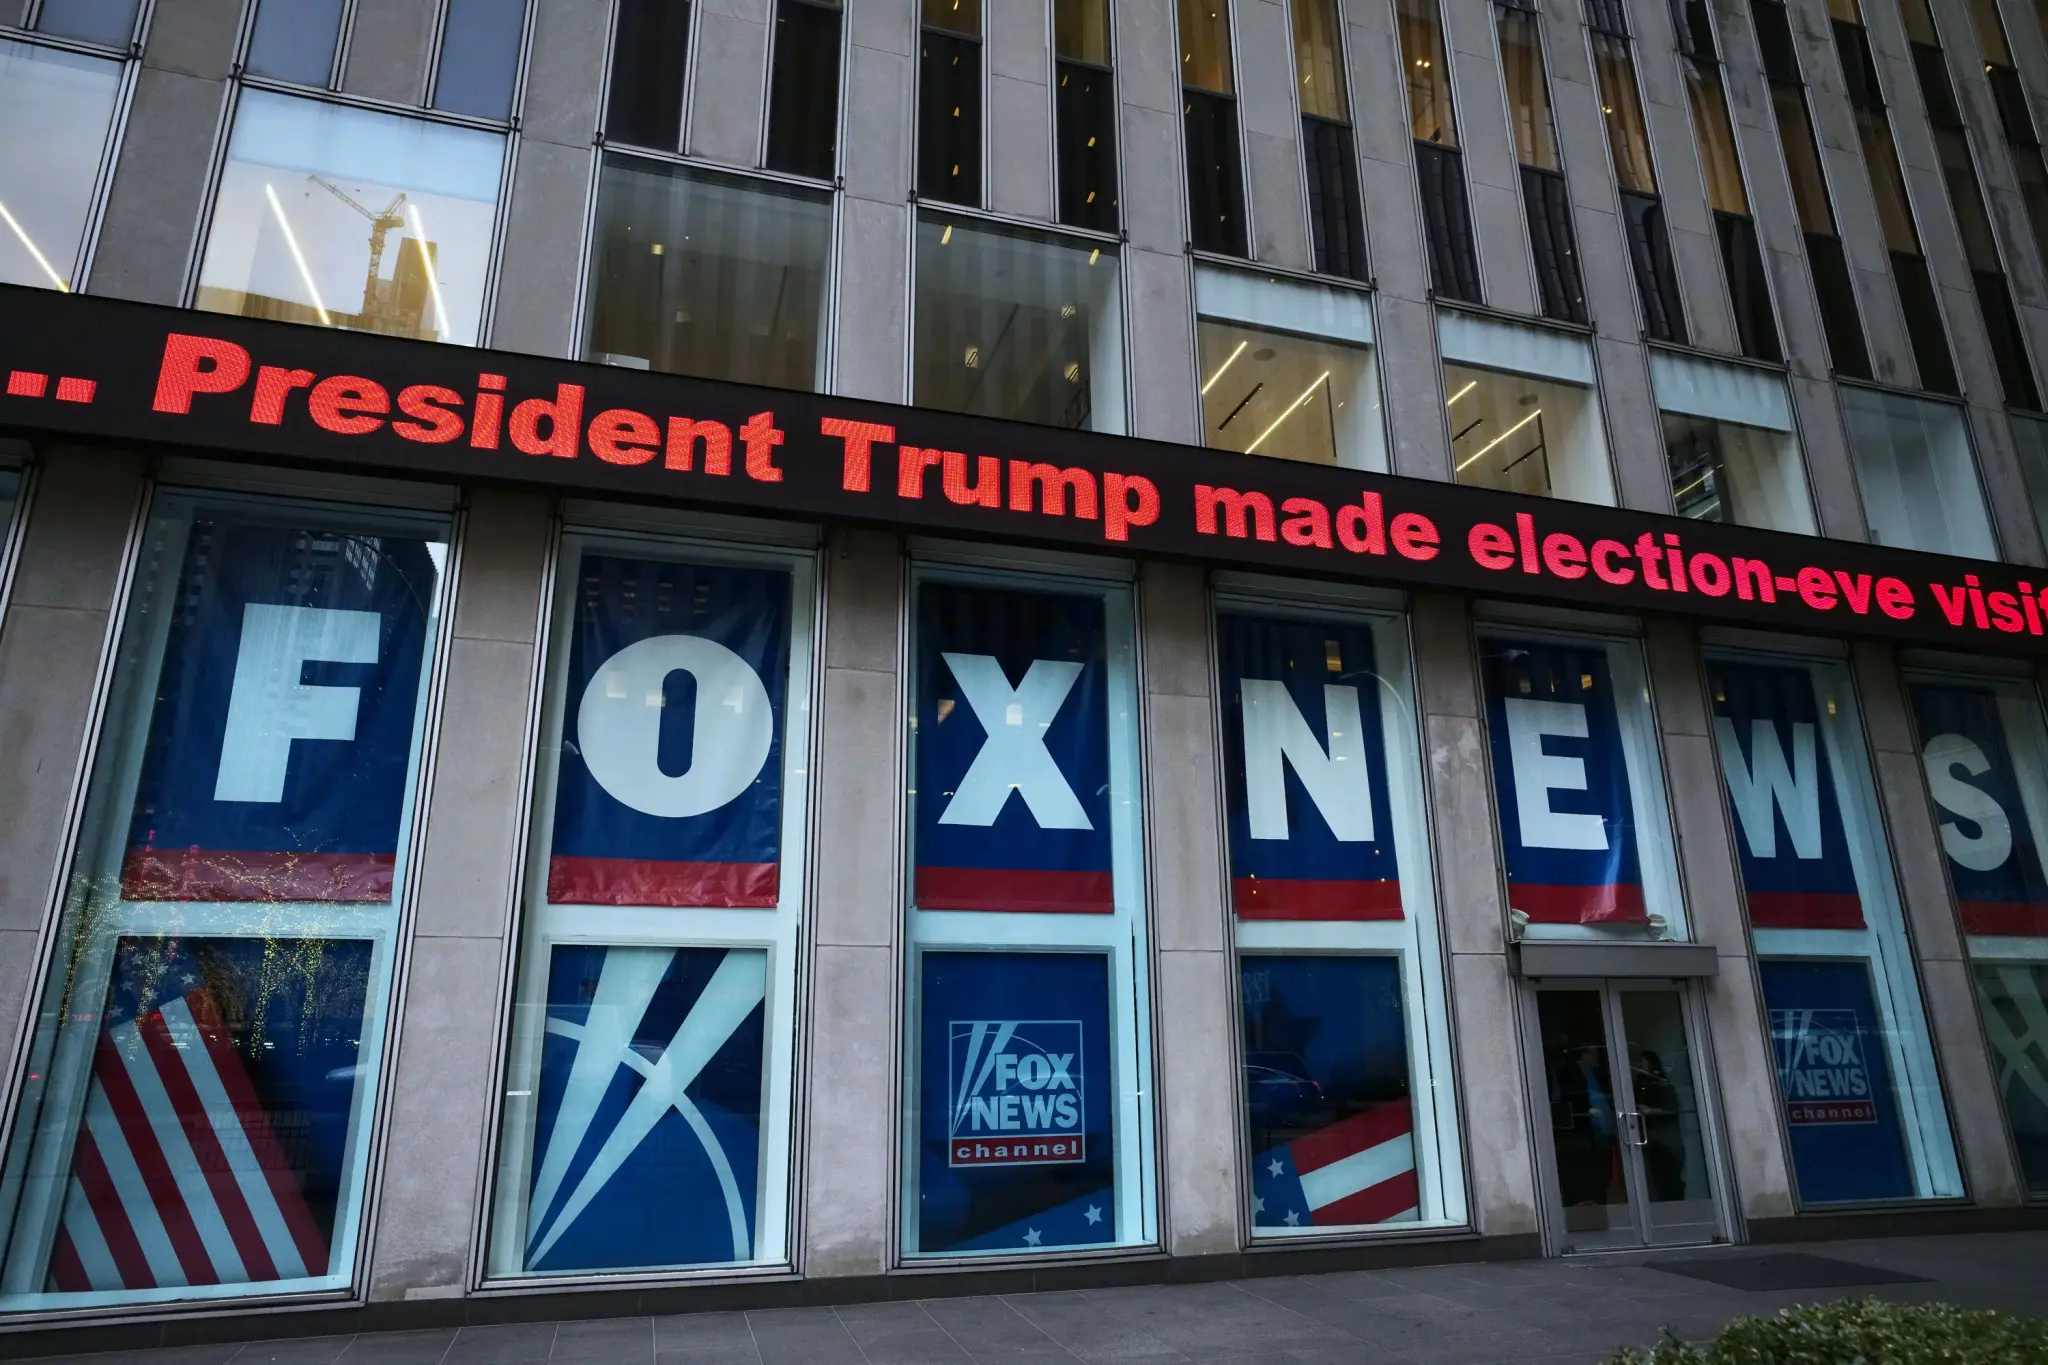 Off camera, Fox hosts doubted 2020 election fraud claims